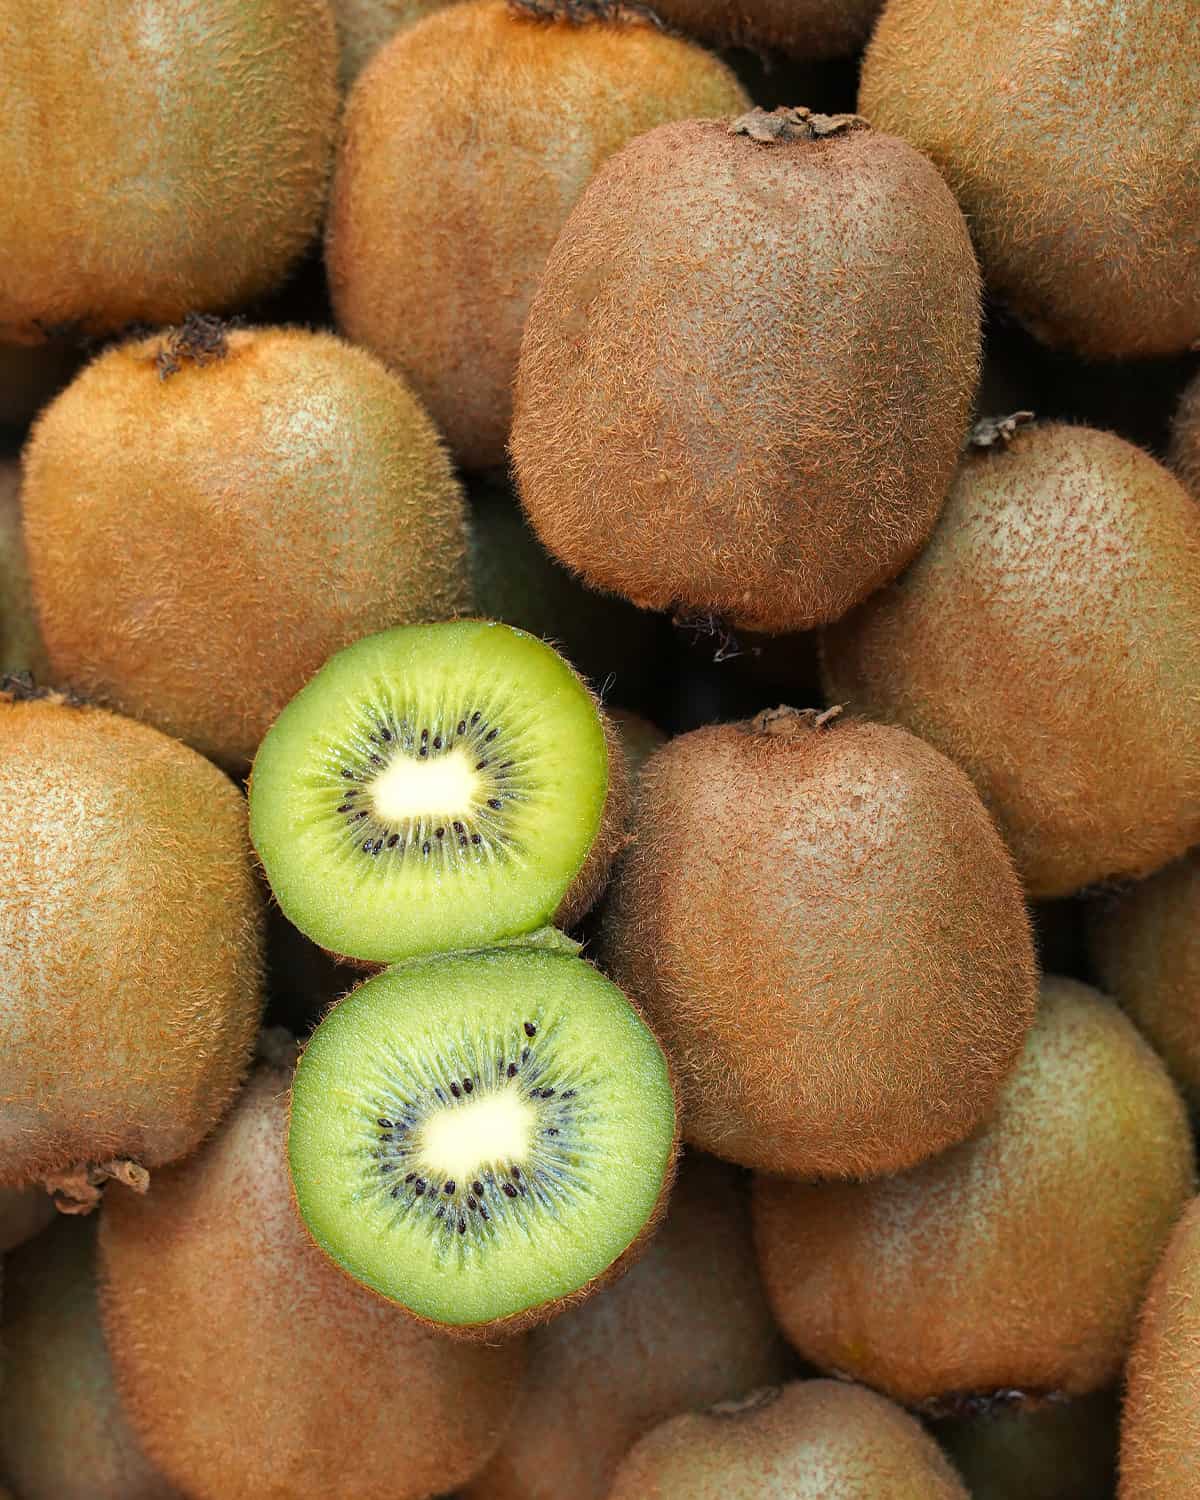 Kiwifruit, a seasonal fruit available in the United States in October, fills a photo frame.